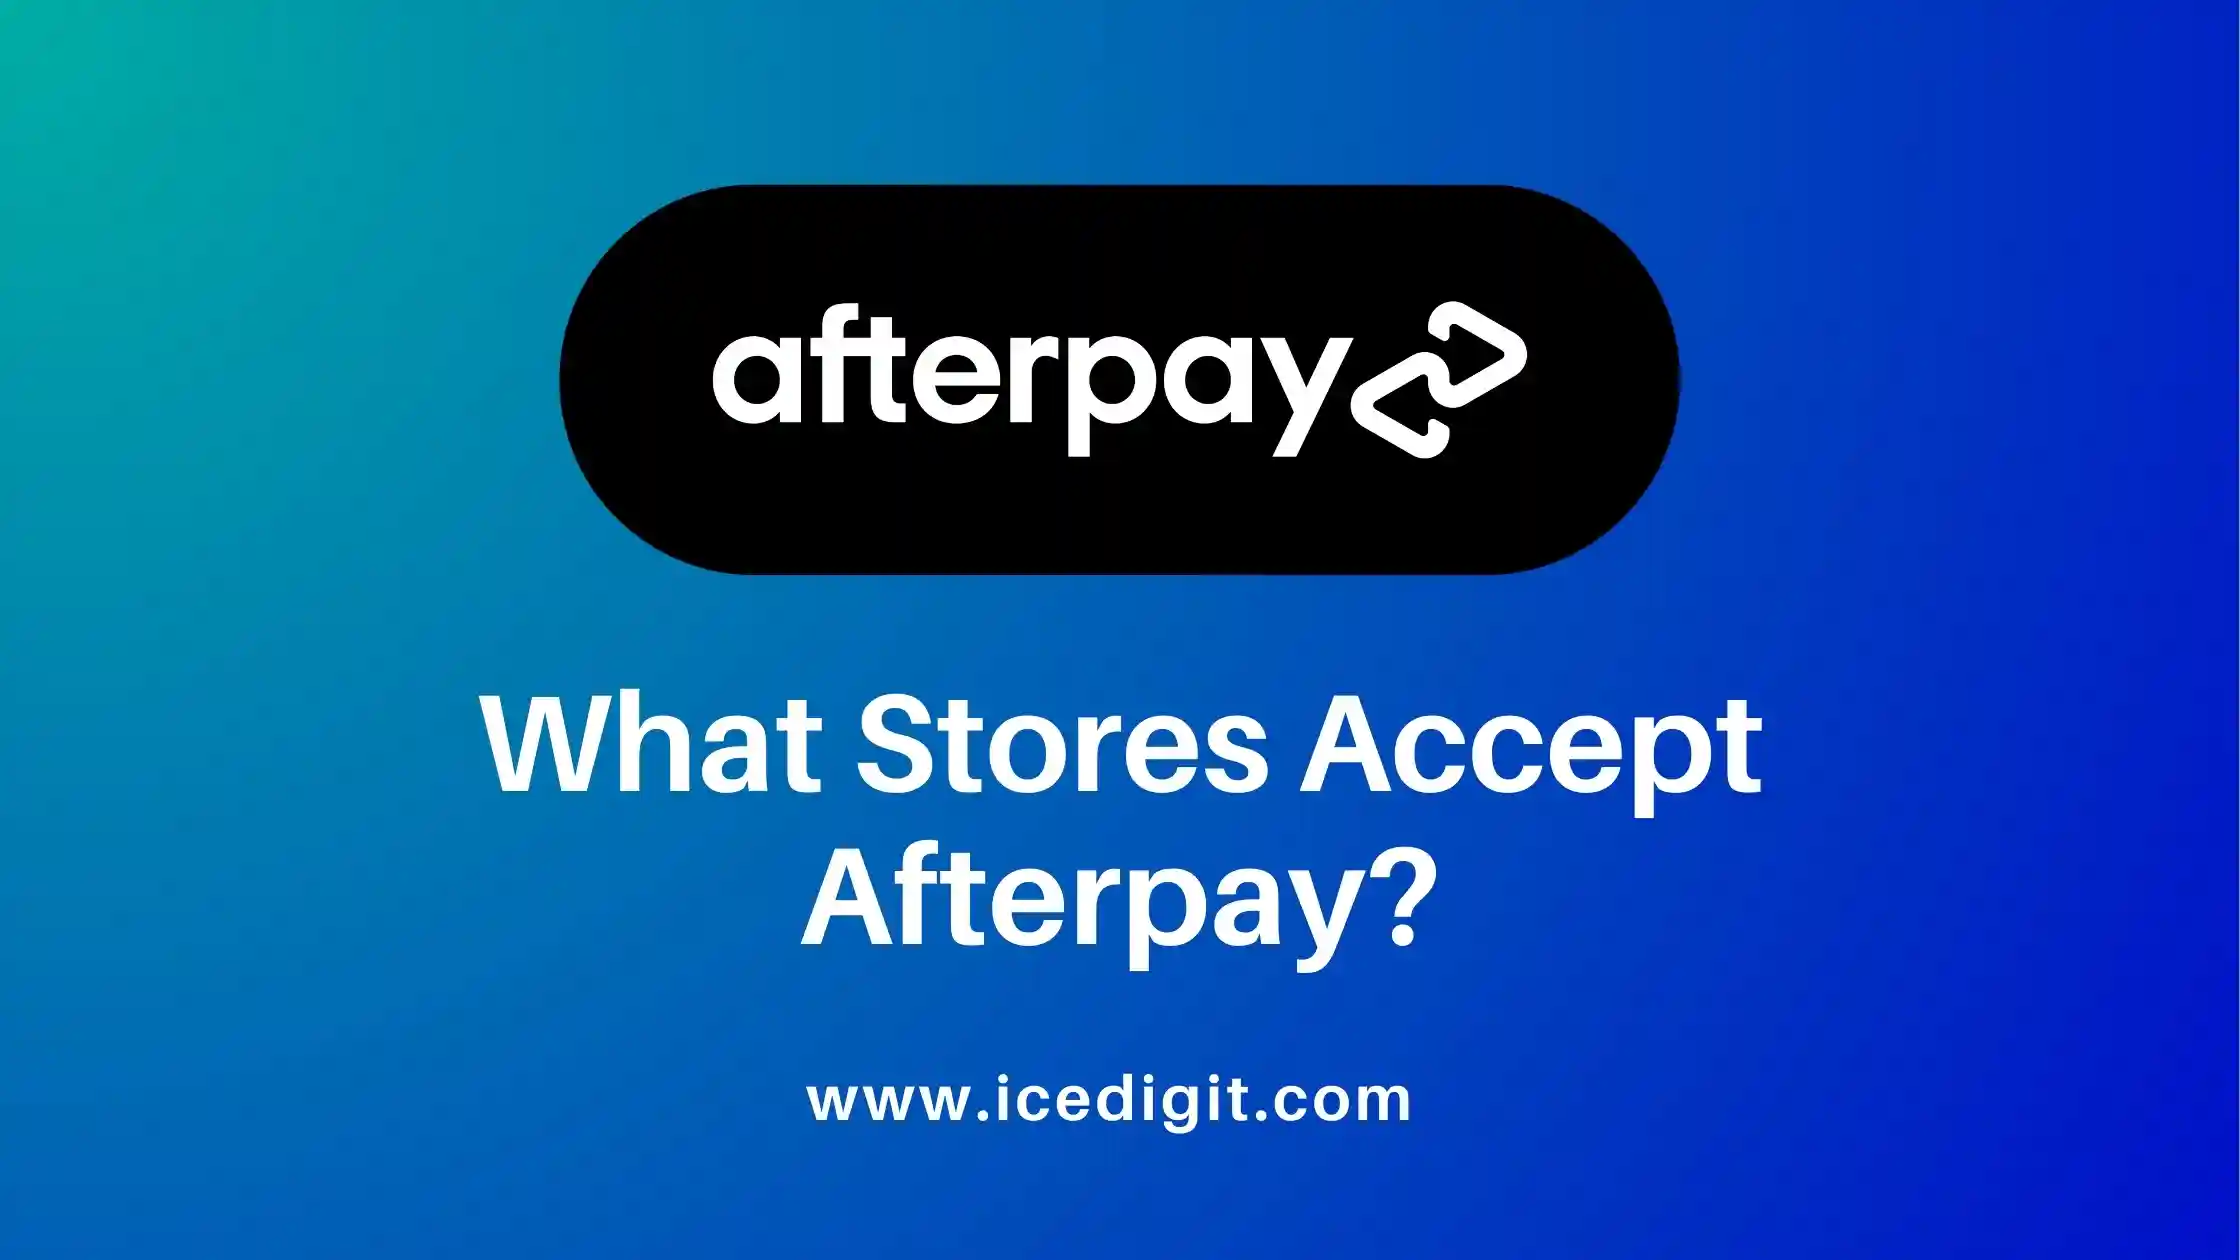 what stores accept afterpay / what stores take afterpay